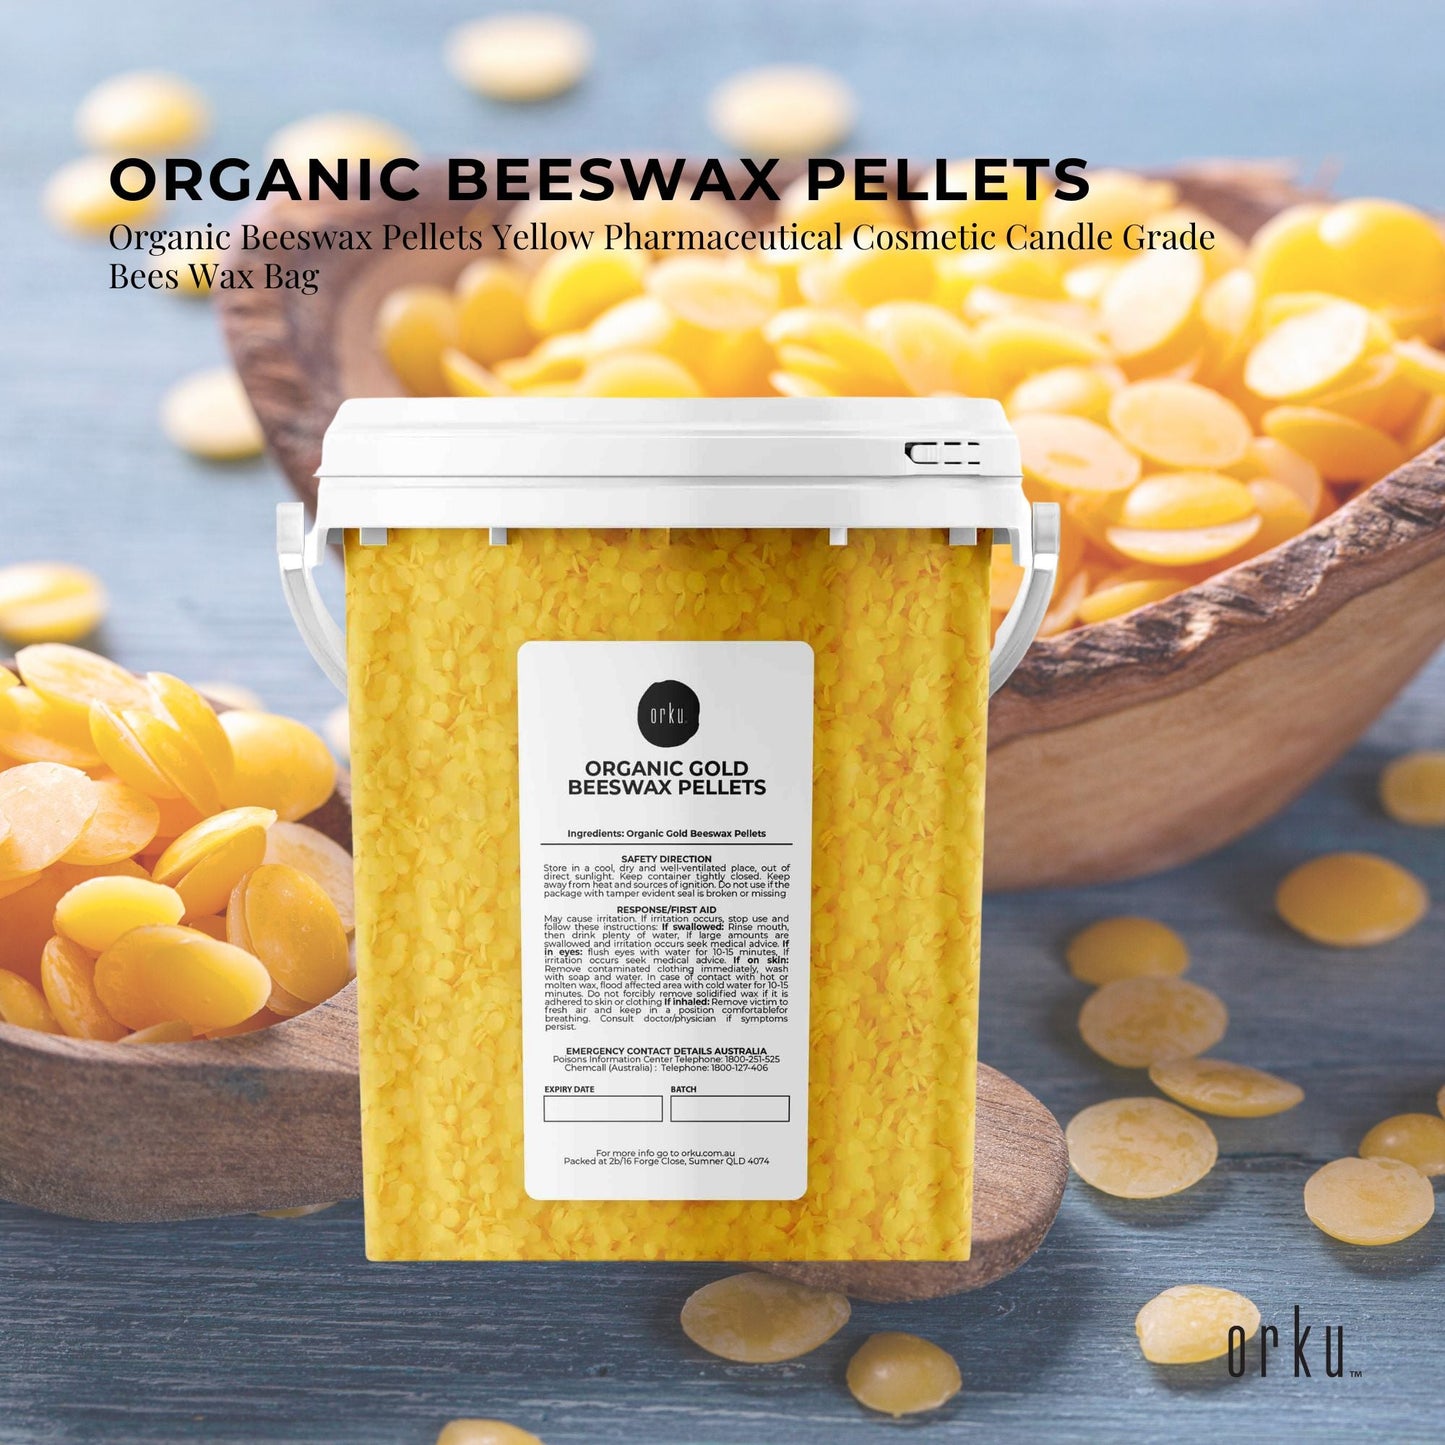 500g Tub Organic Beeswax Pellets Pharmaceutical Cosmetic Candle Yellow Bees Wax